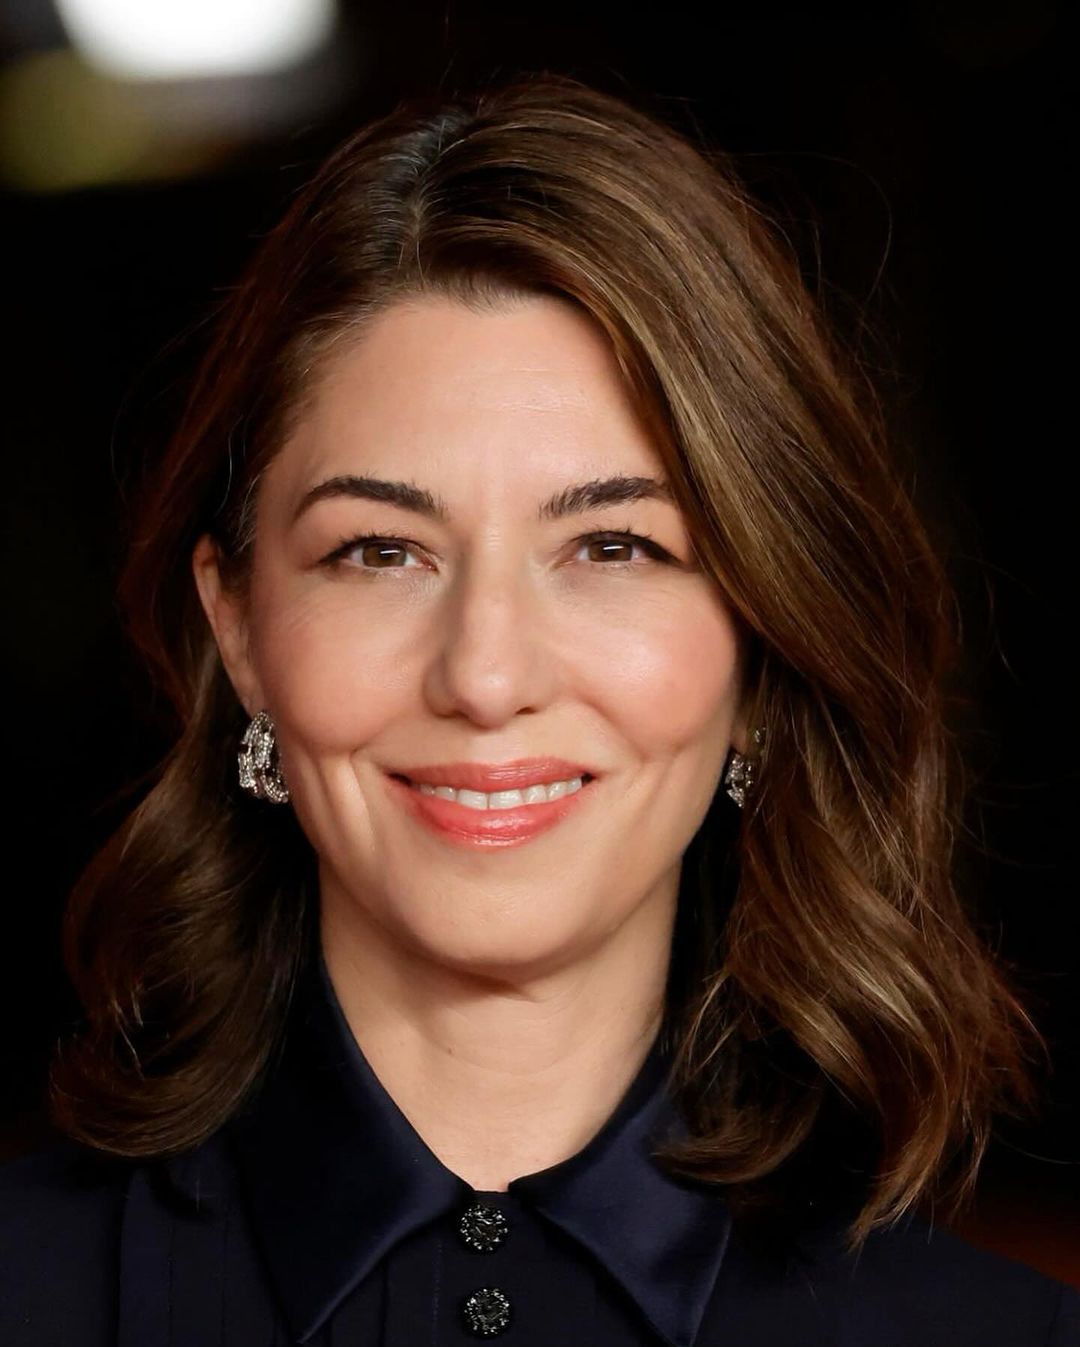 Sophia Coppola received the Visionary Award at the Academy Museum Gala